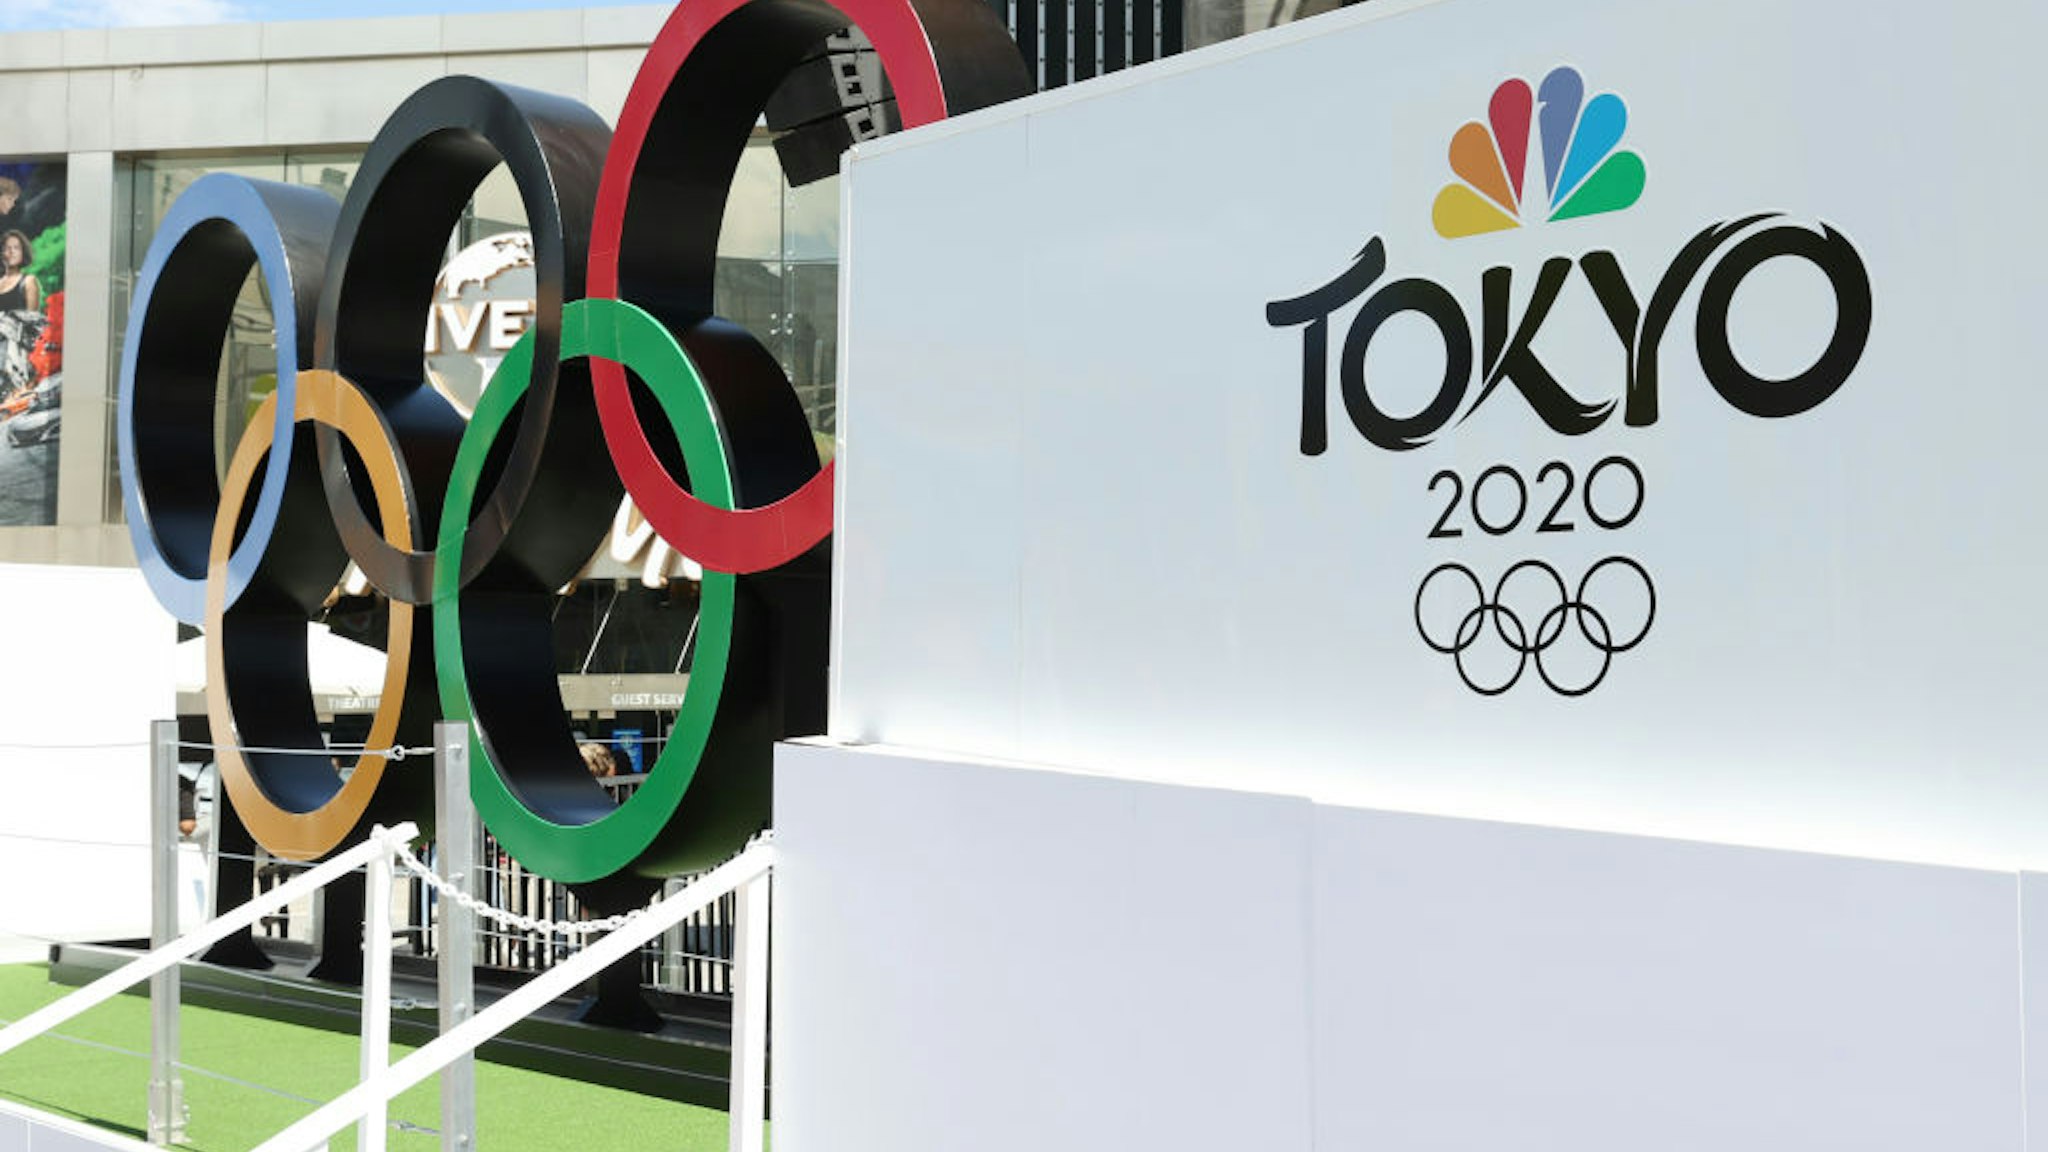 UNIVERSAL CITY, CALIFORNIA - JULY 03: NBC Olympics launches "Rings Across America" Tour life-size set of iconic Olympic Rings at Universal Studios Hollywood on July 03, 2021 in Universal City, California. (Photo by Amy Sussman/Getty Images)